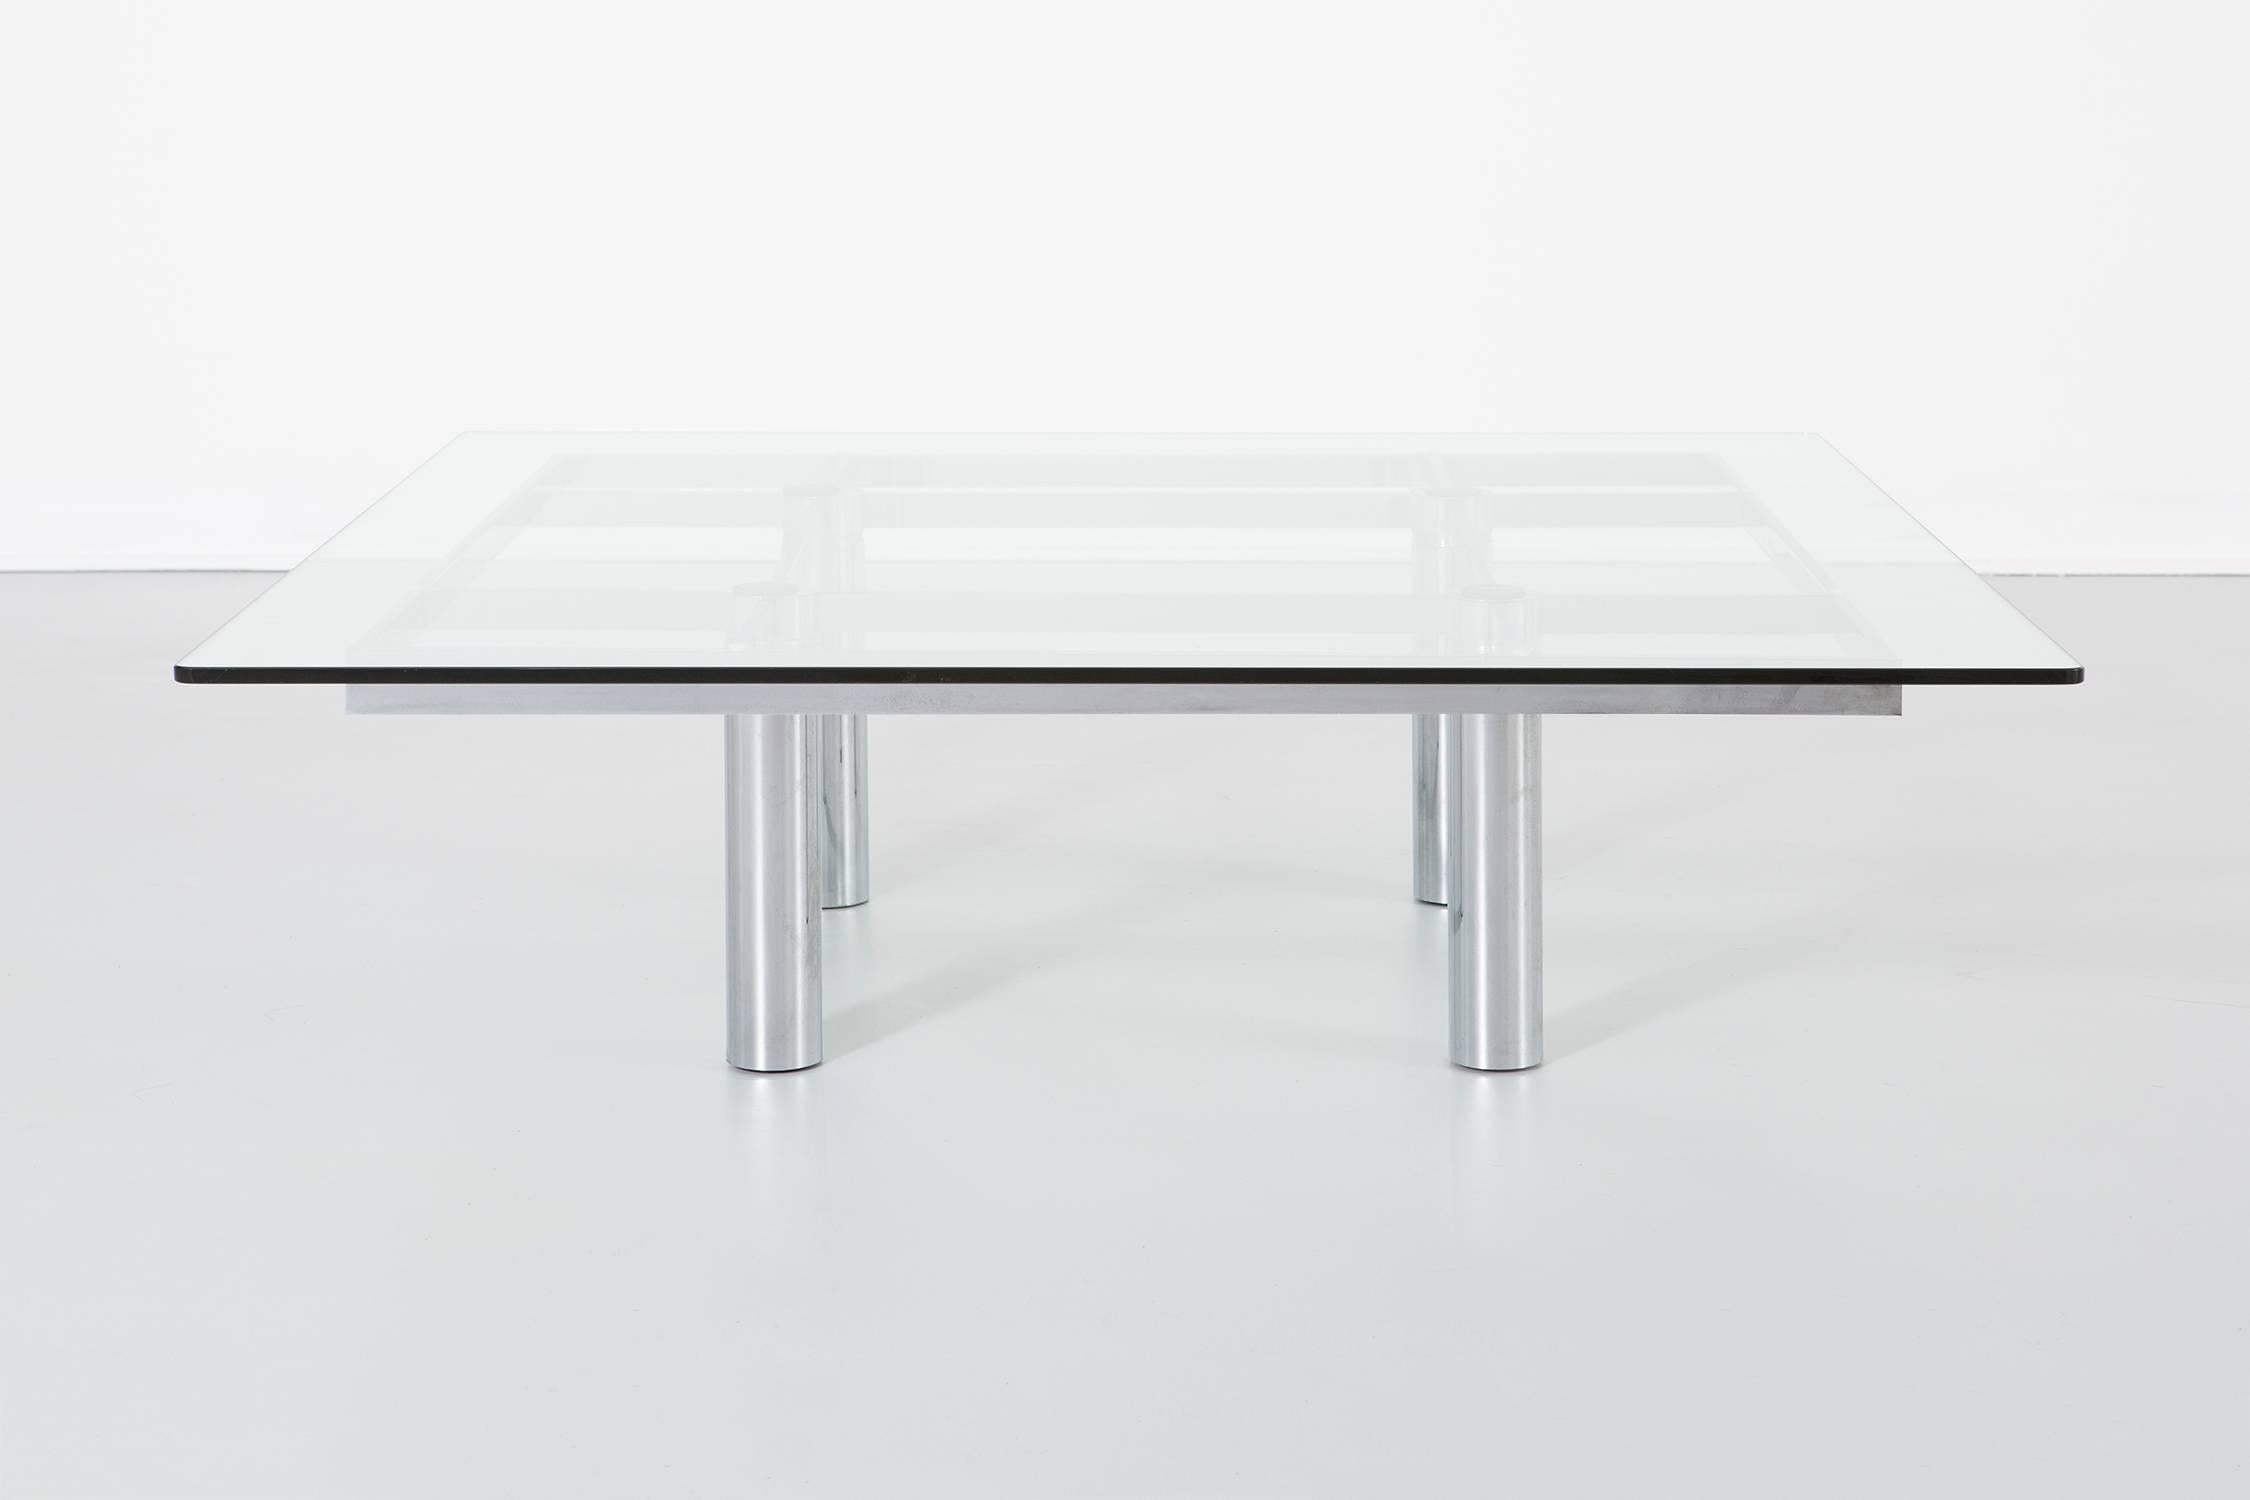 Coffee table

Designed by Tobia Scarpa for Knoll

USA, circa 1960s

Glass and chrome

Measures: 15 ¼” H x 53 13/16” W x 53 13/16” D.